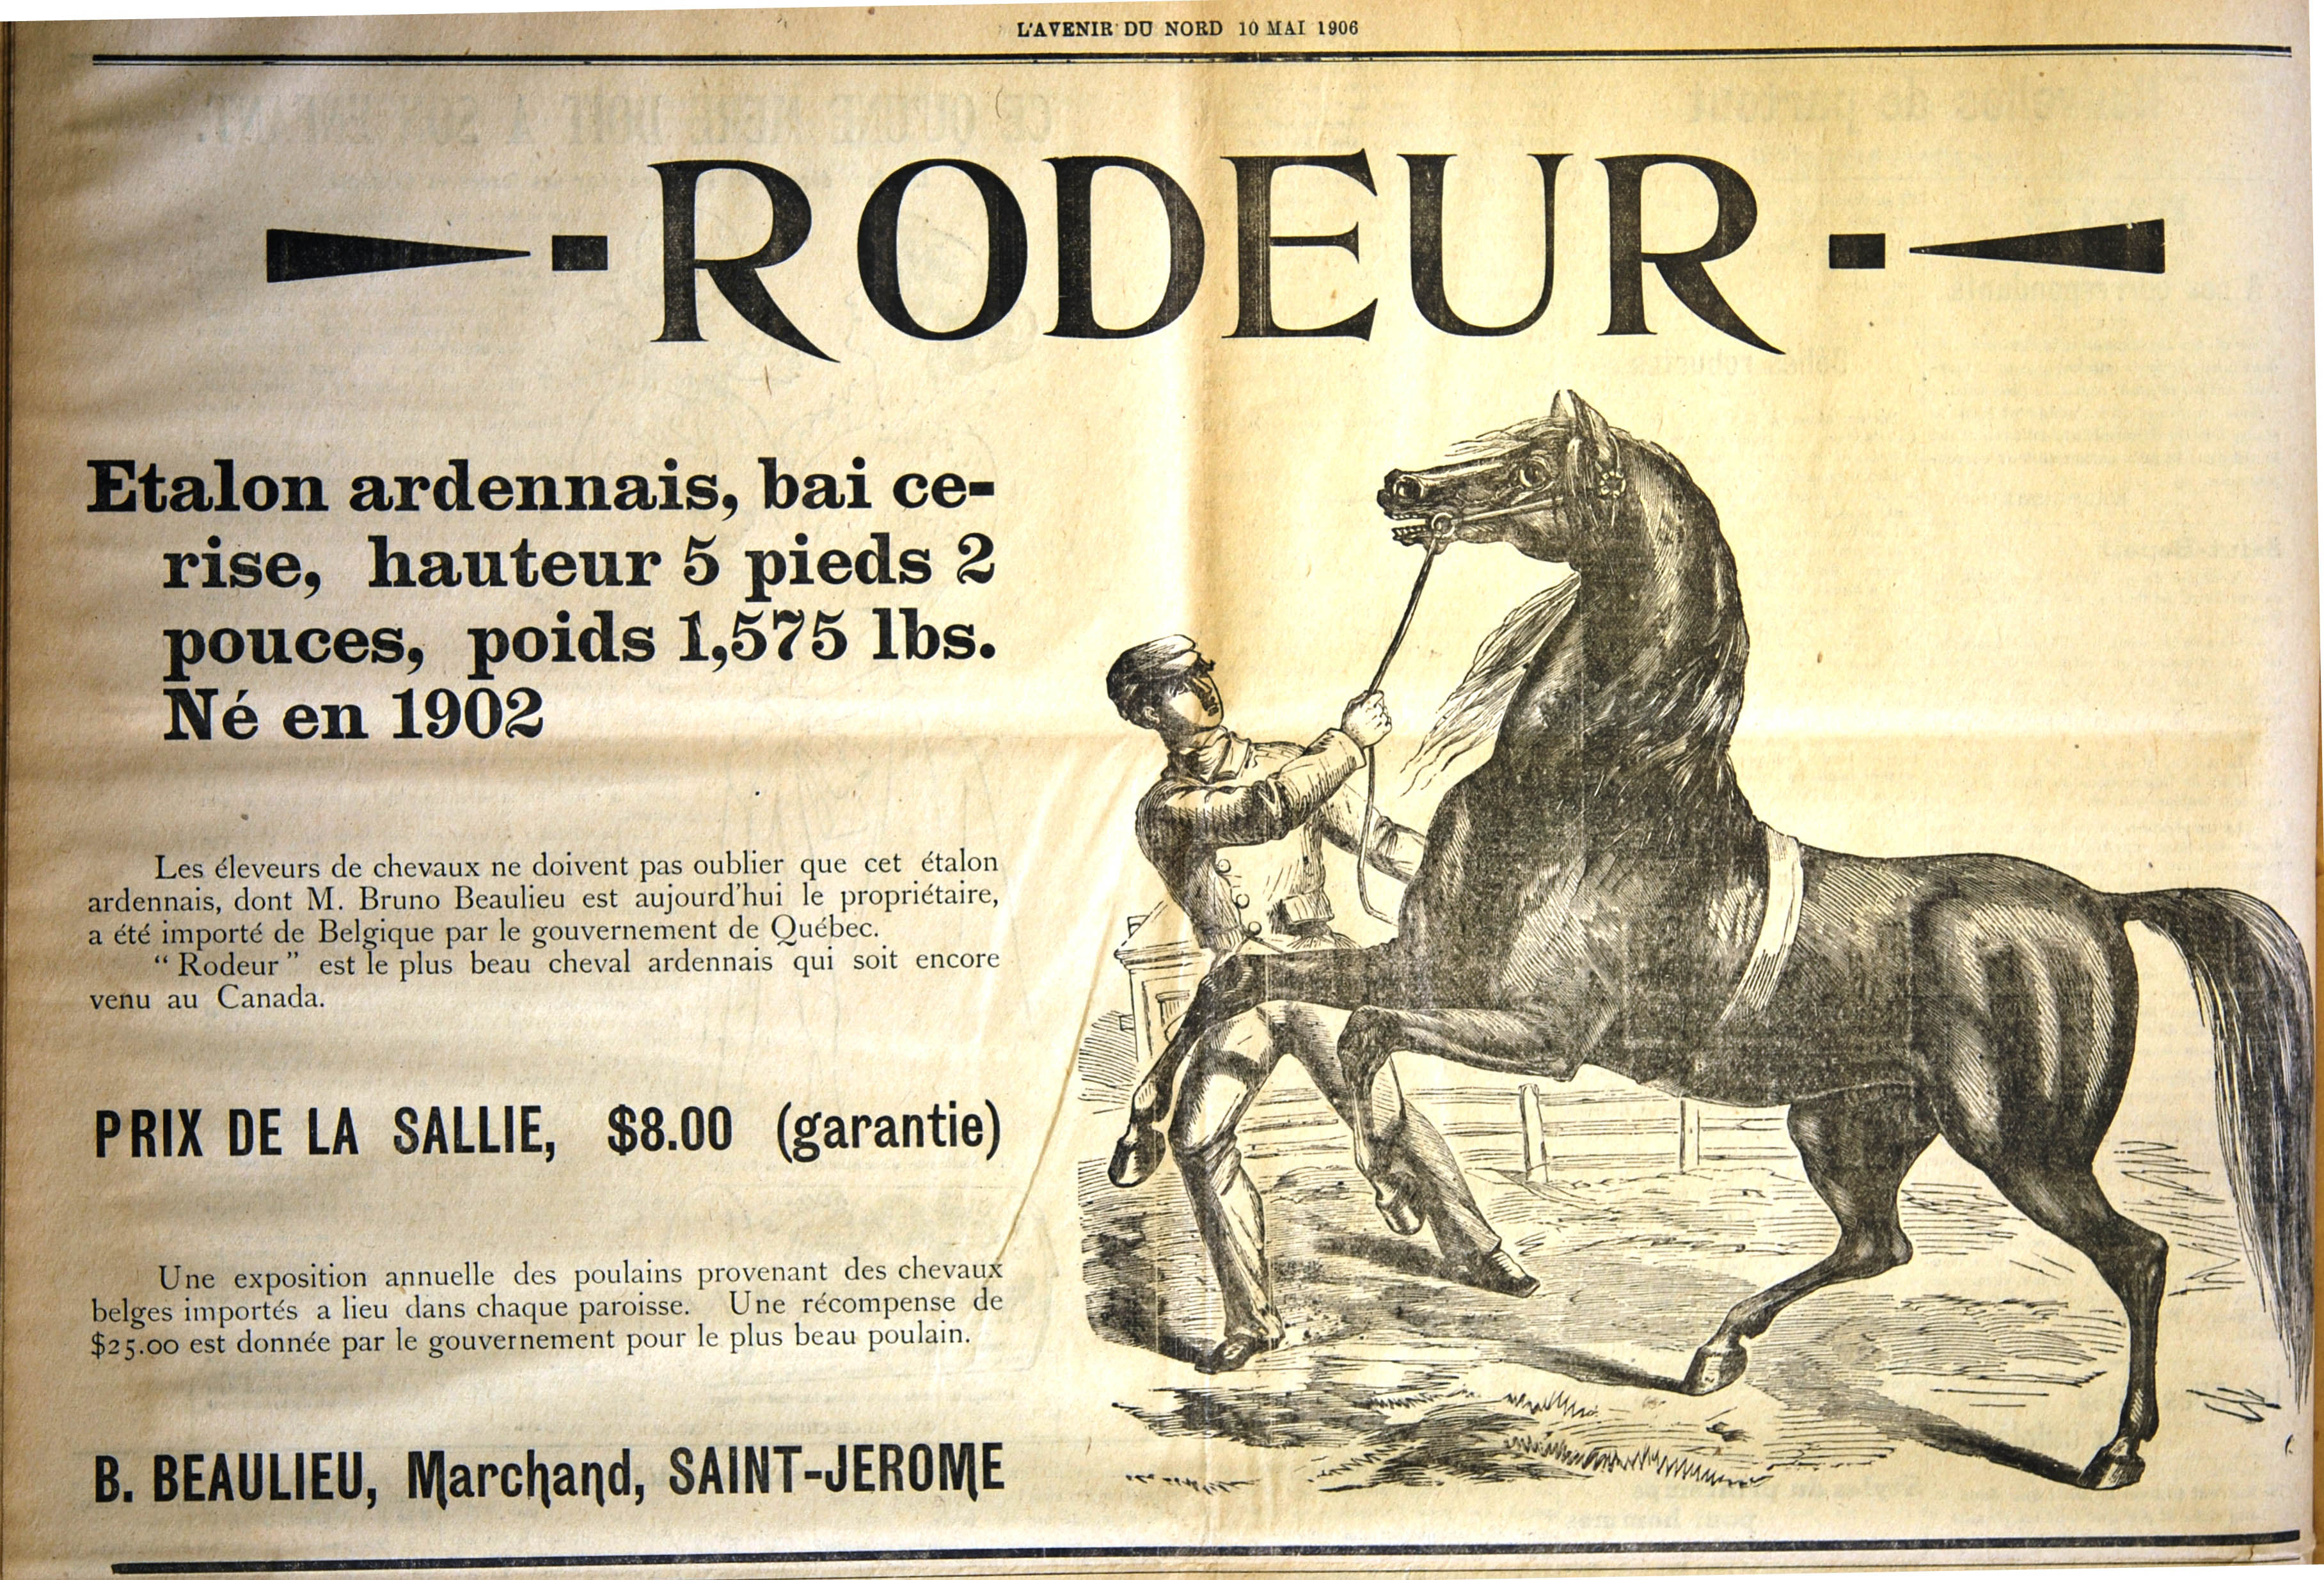 Advertisement that appeared in the newspaper L’Avenir du Nord of May 10, 1906. The ad touts the stud services of an Ardennais stallion named Rodeur, imported from Belgium by the Quebec government. To the right is a drawing of a spirited stallion and a handler pulling on a bridle in an effort to control it.